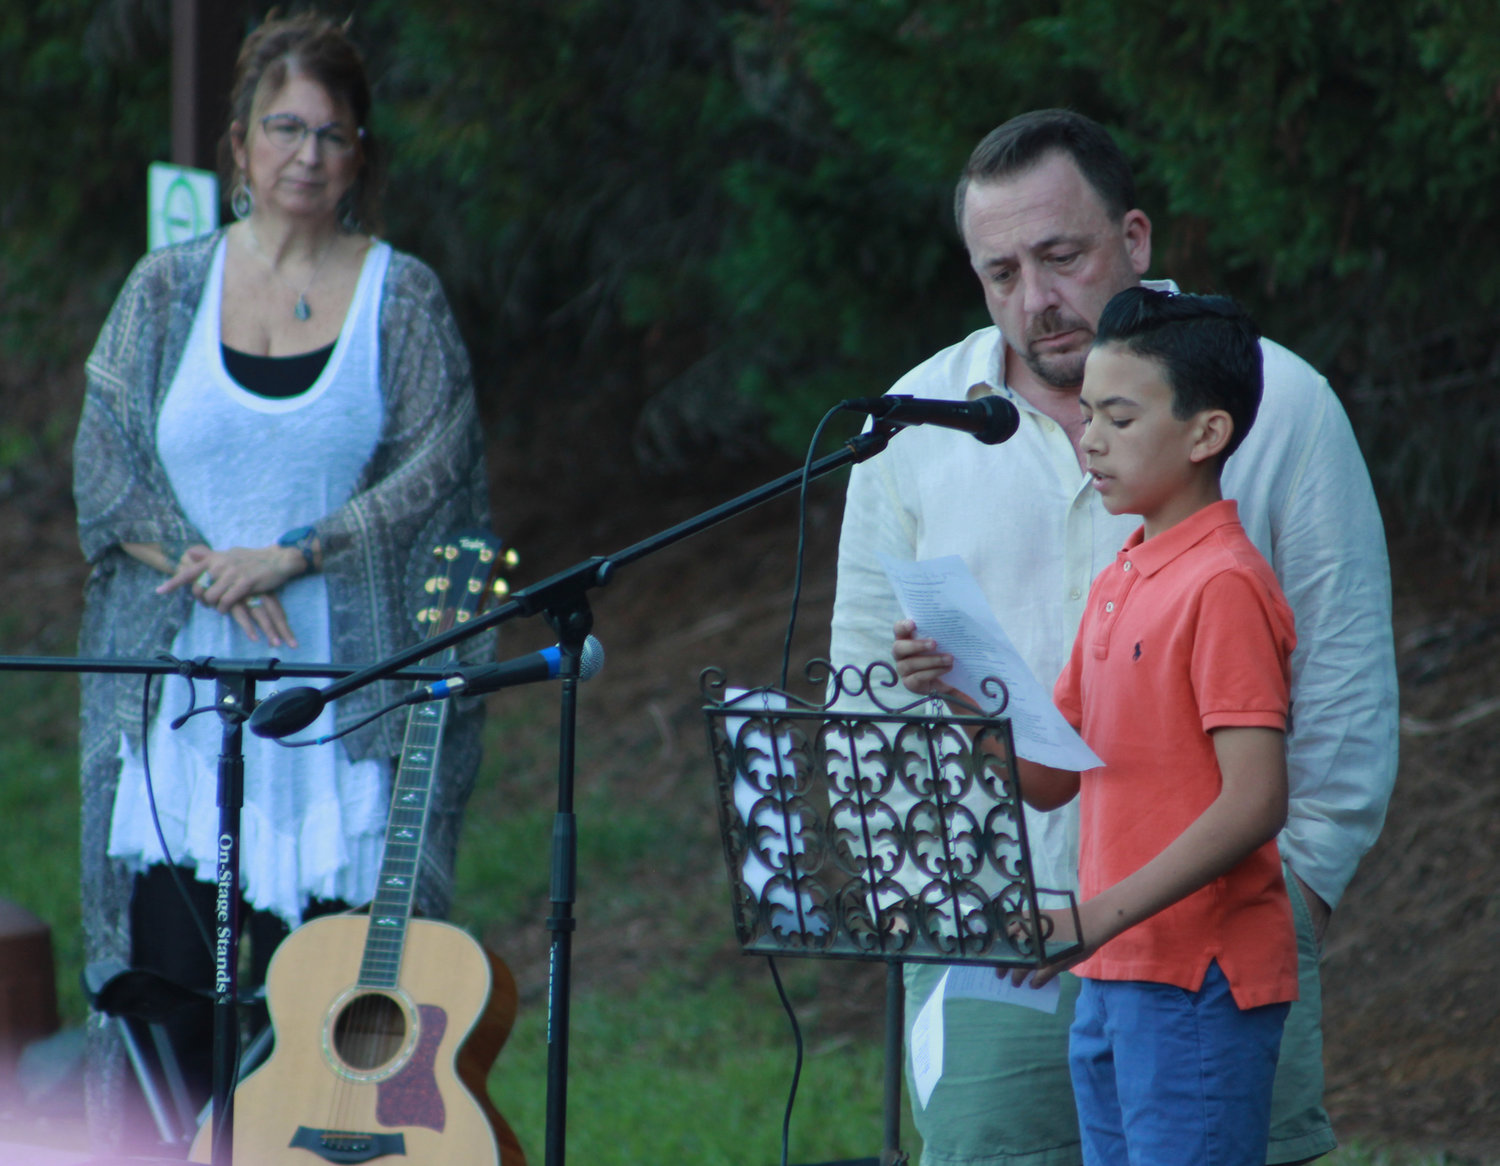 James Vose, center, and his son Waylon Vose (14), right, volunteer to read aloud the list of mass shootings that have occured in the United States during the Chatham County vigil for recent mass shootings on Sunday, May 29, in Pittsboro. The long list detailed the places where the shootings occurred and the number of victims.